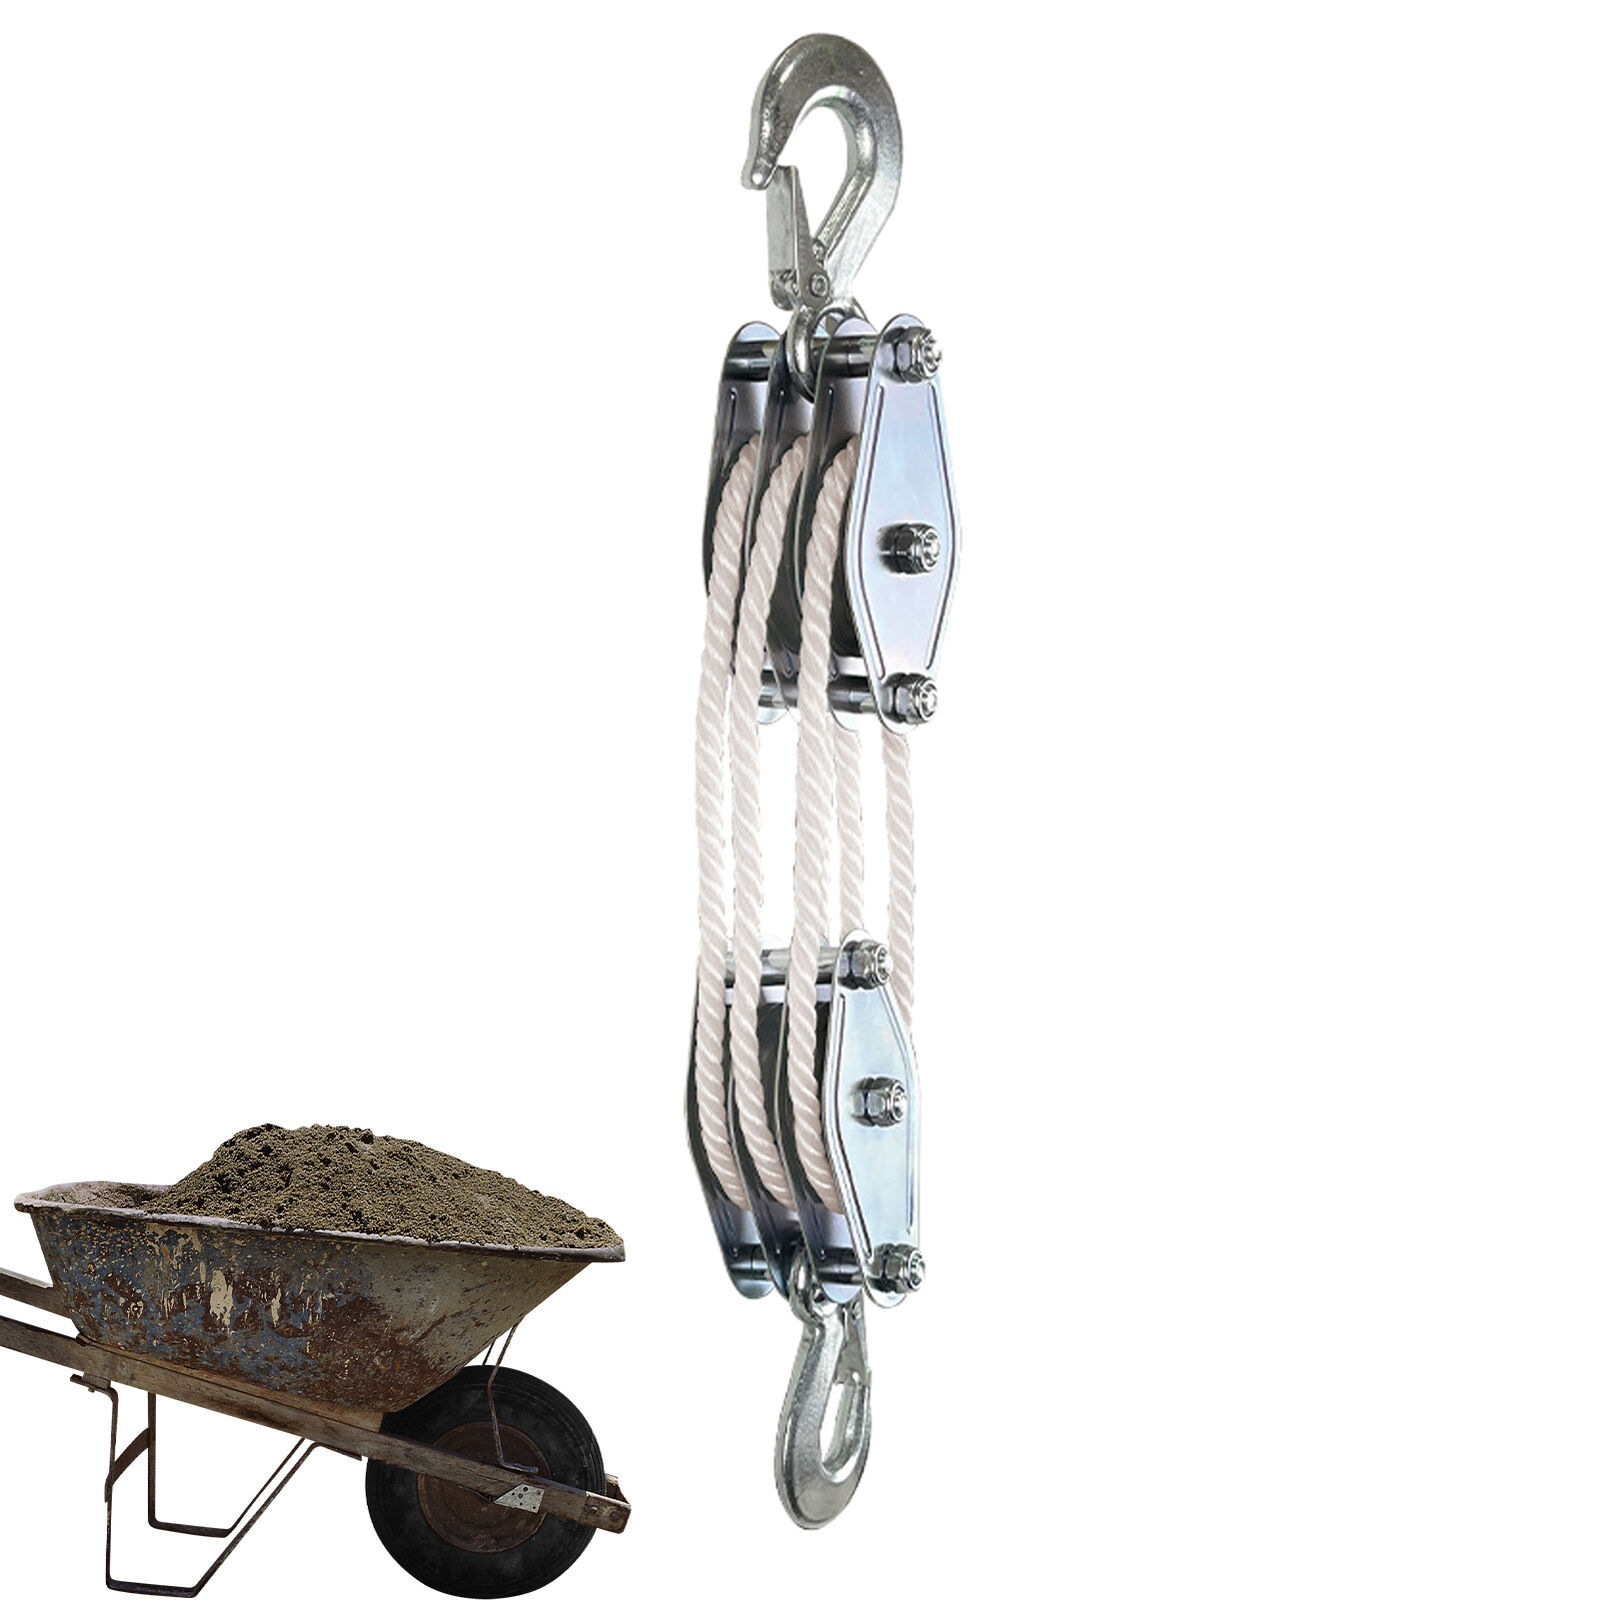 Block And Tackle Pulley System Rope Pulley Hoist For Garage Block And Tackle